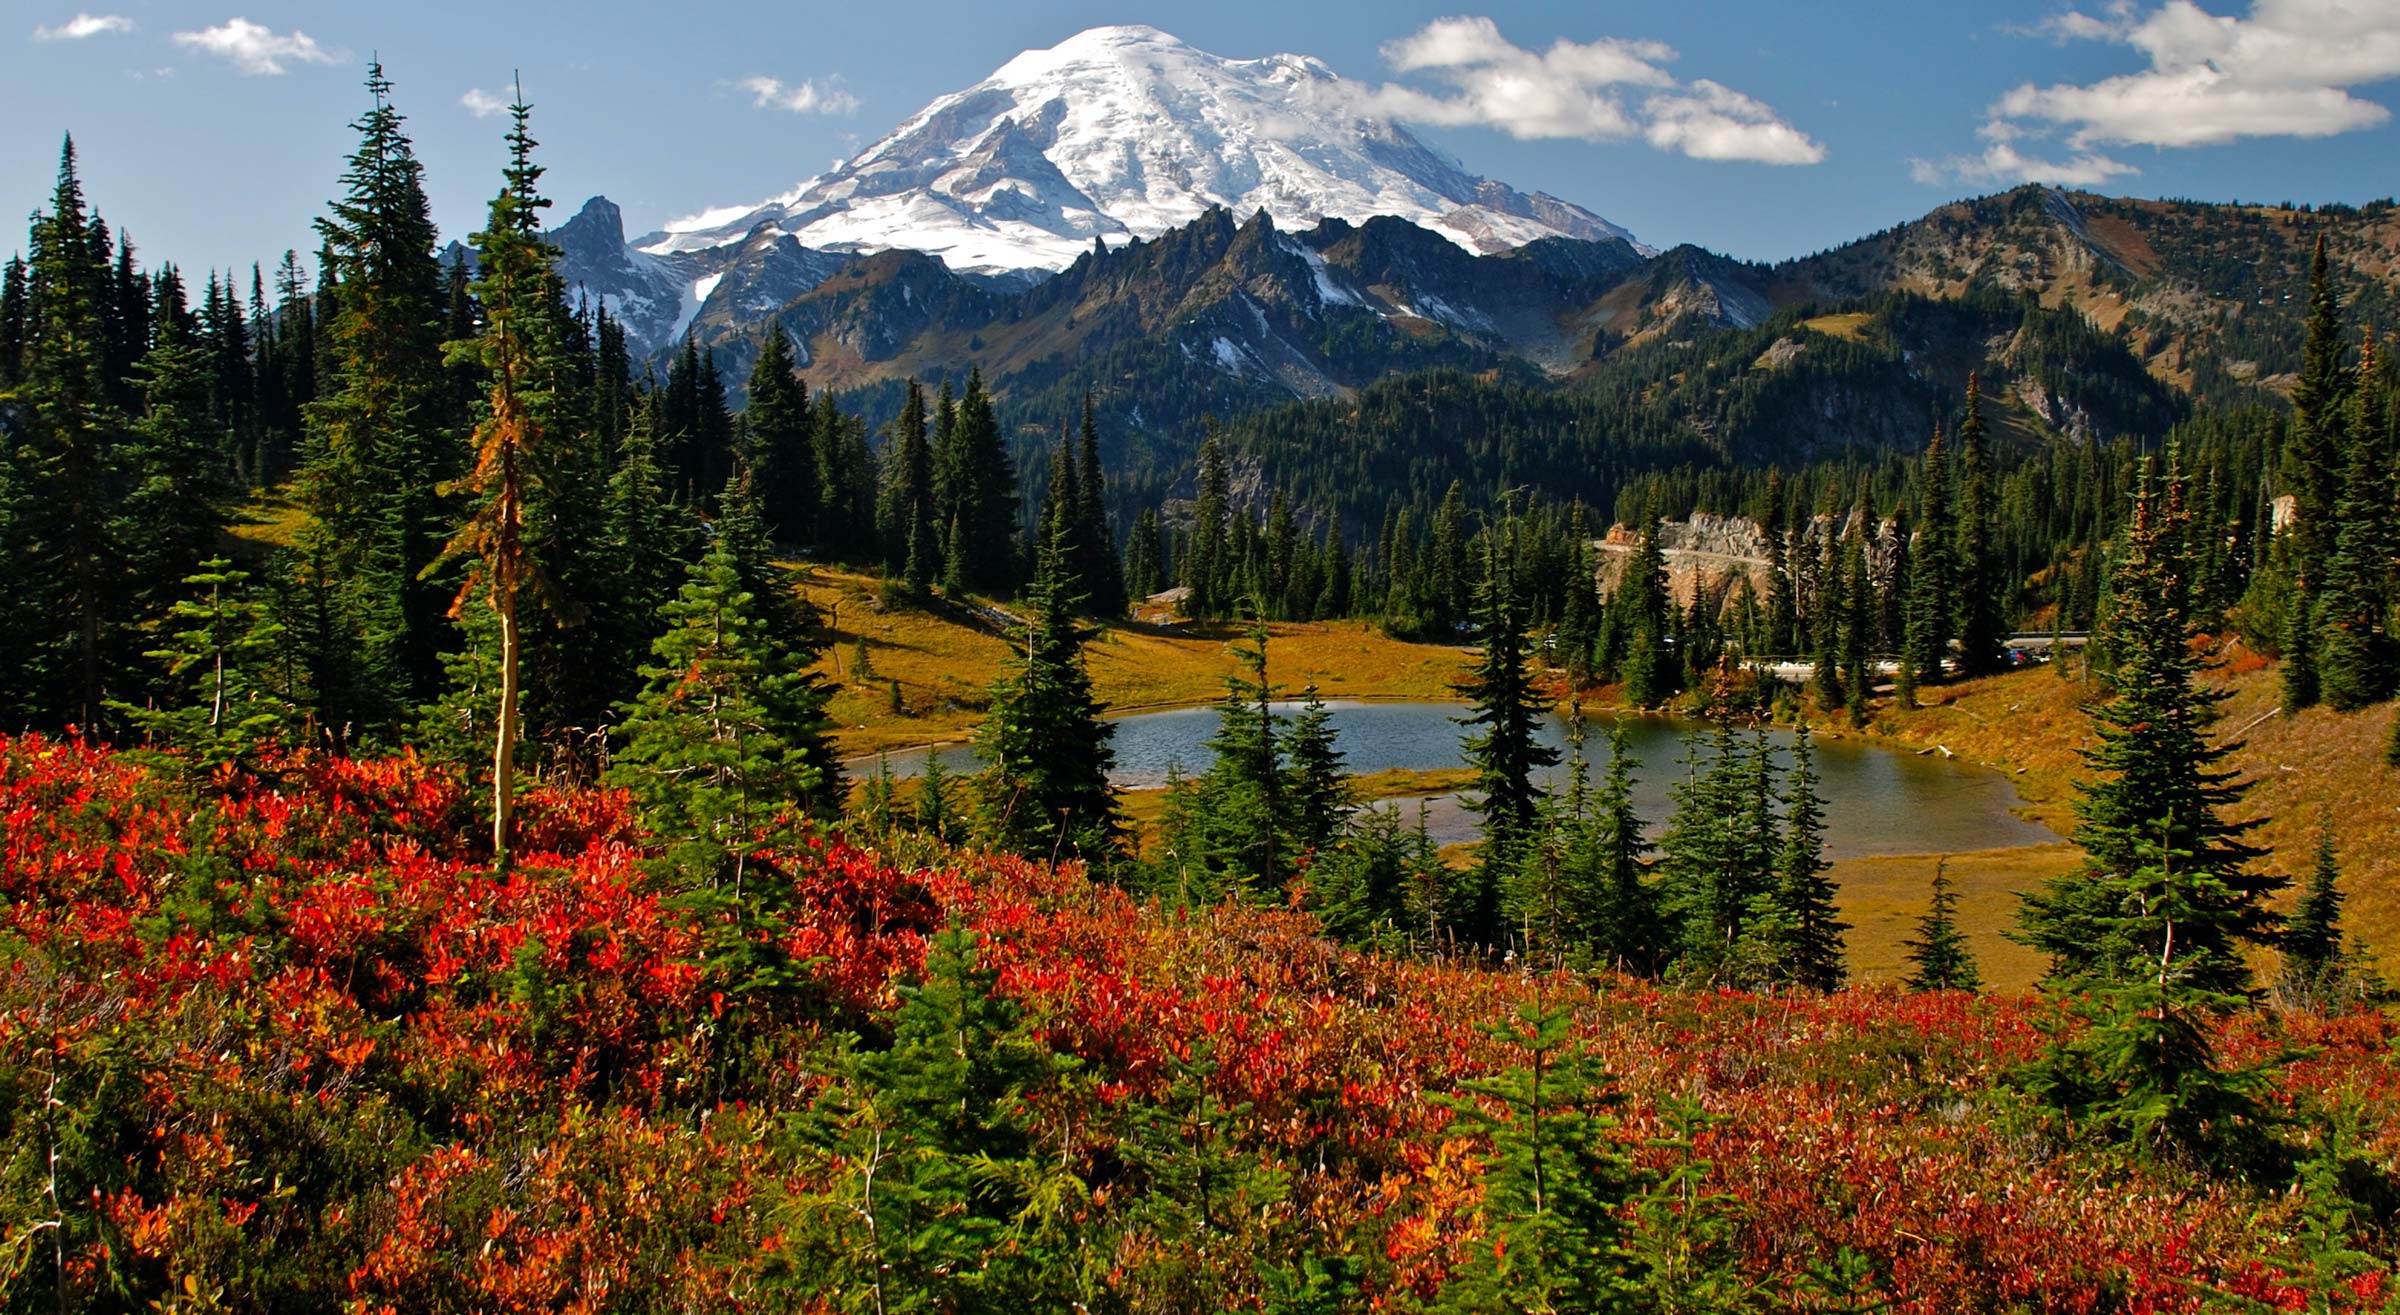 Trees and colorful plants in front of mountains in Mt Rainier National Park, Washington.